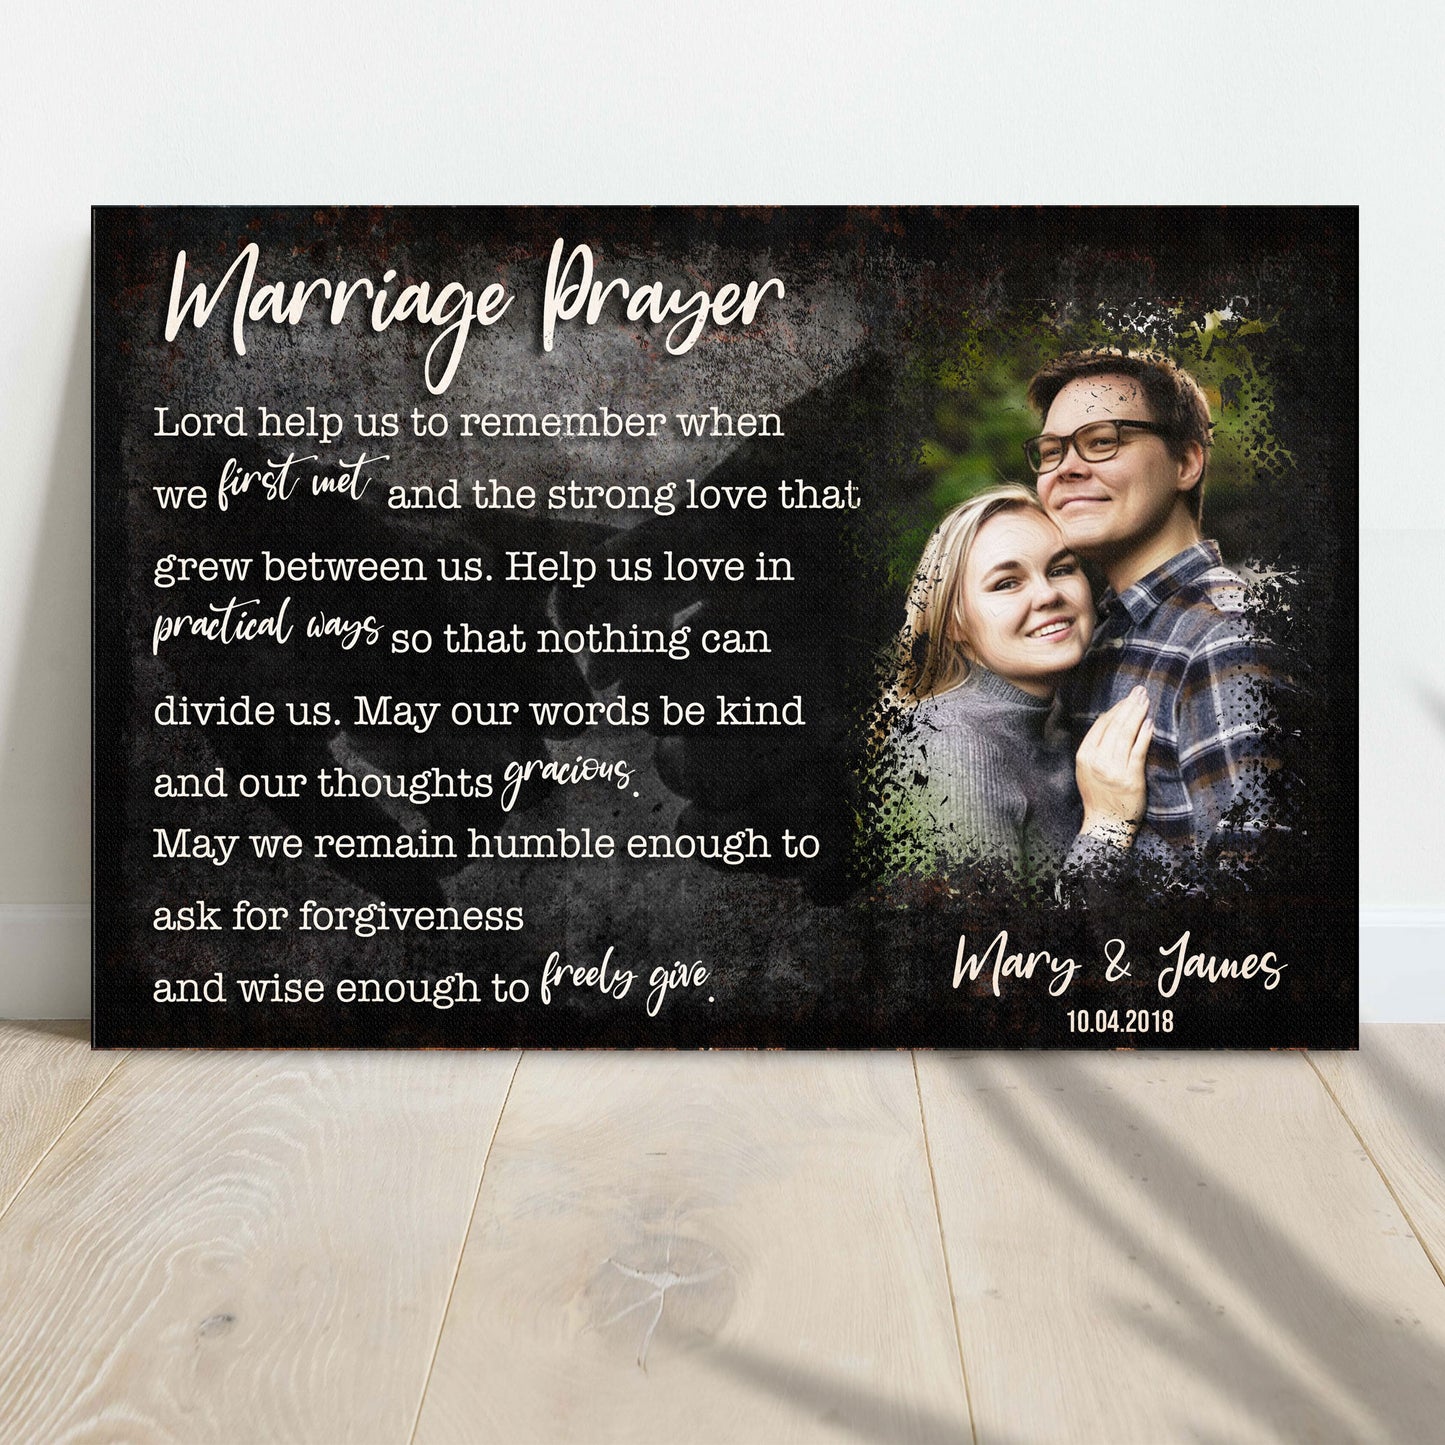 Marriage Prayer Couple Sign  - Image by Tailored Canvases